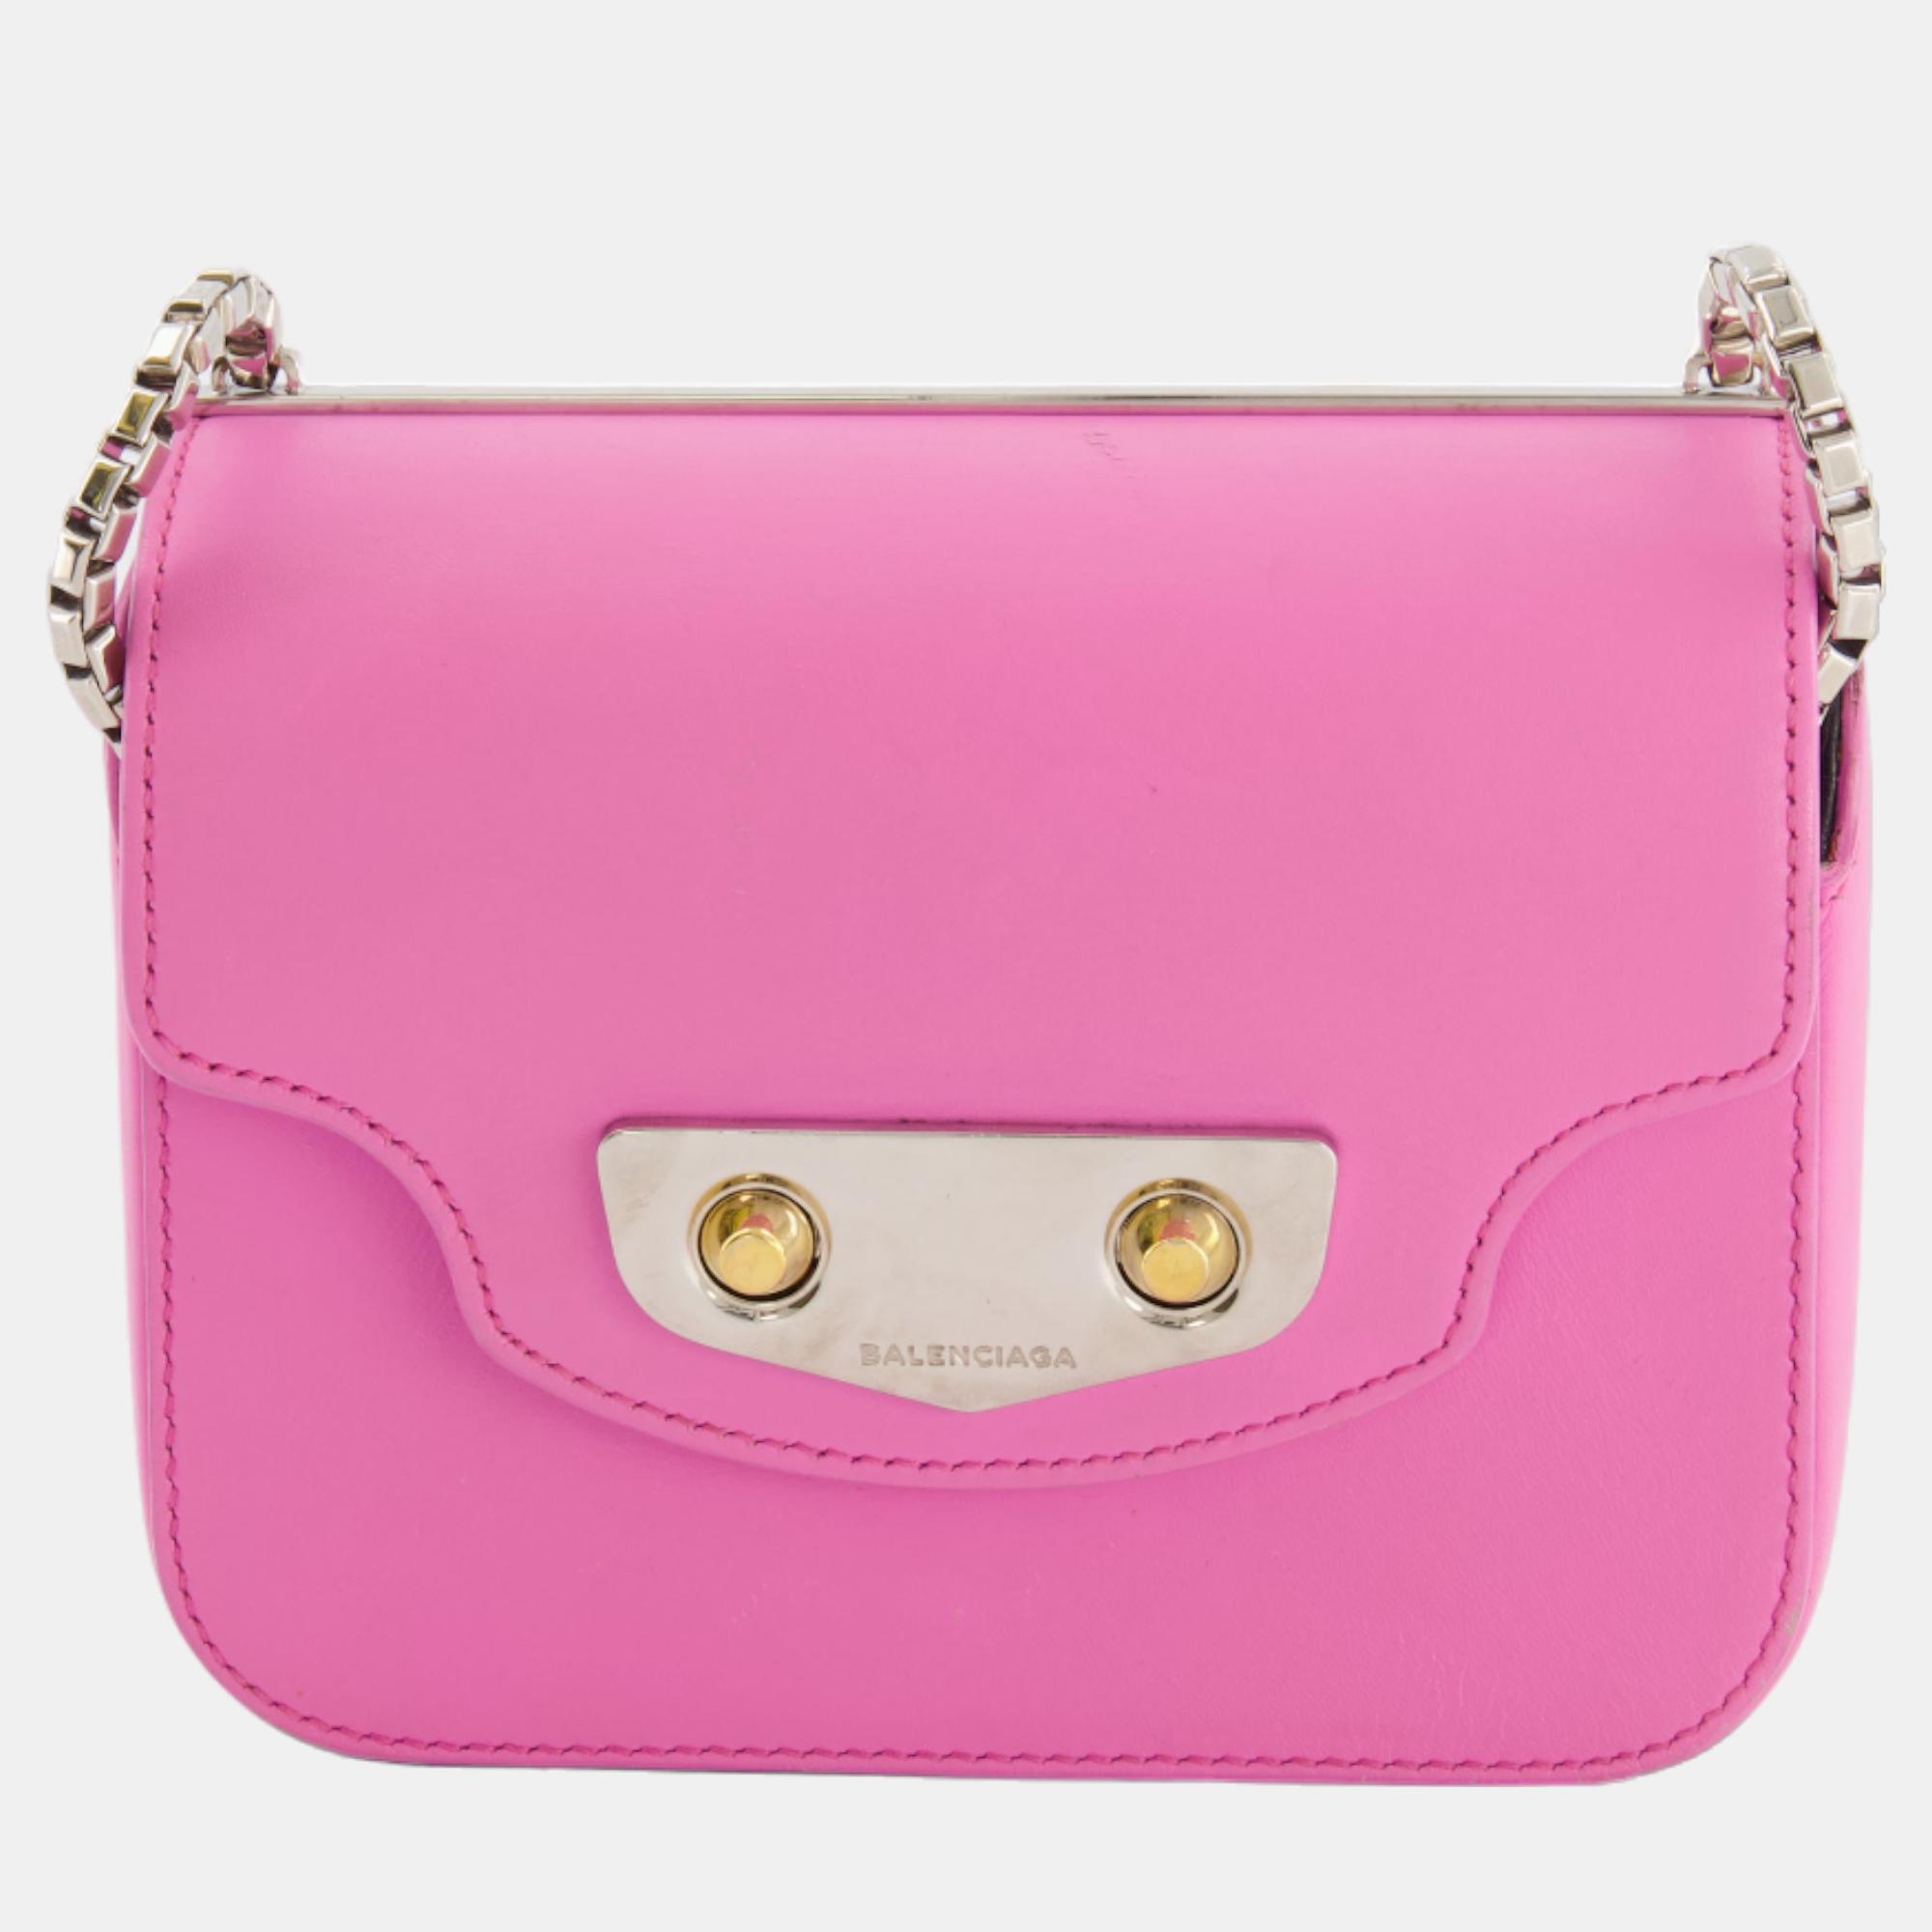 Balenciaga candy pink small leather bag with silver and gold hardware